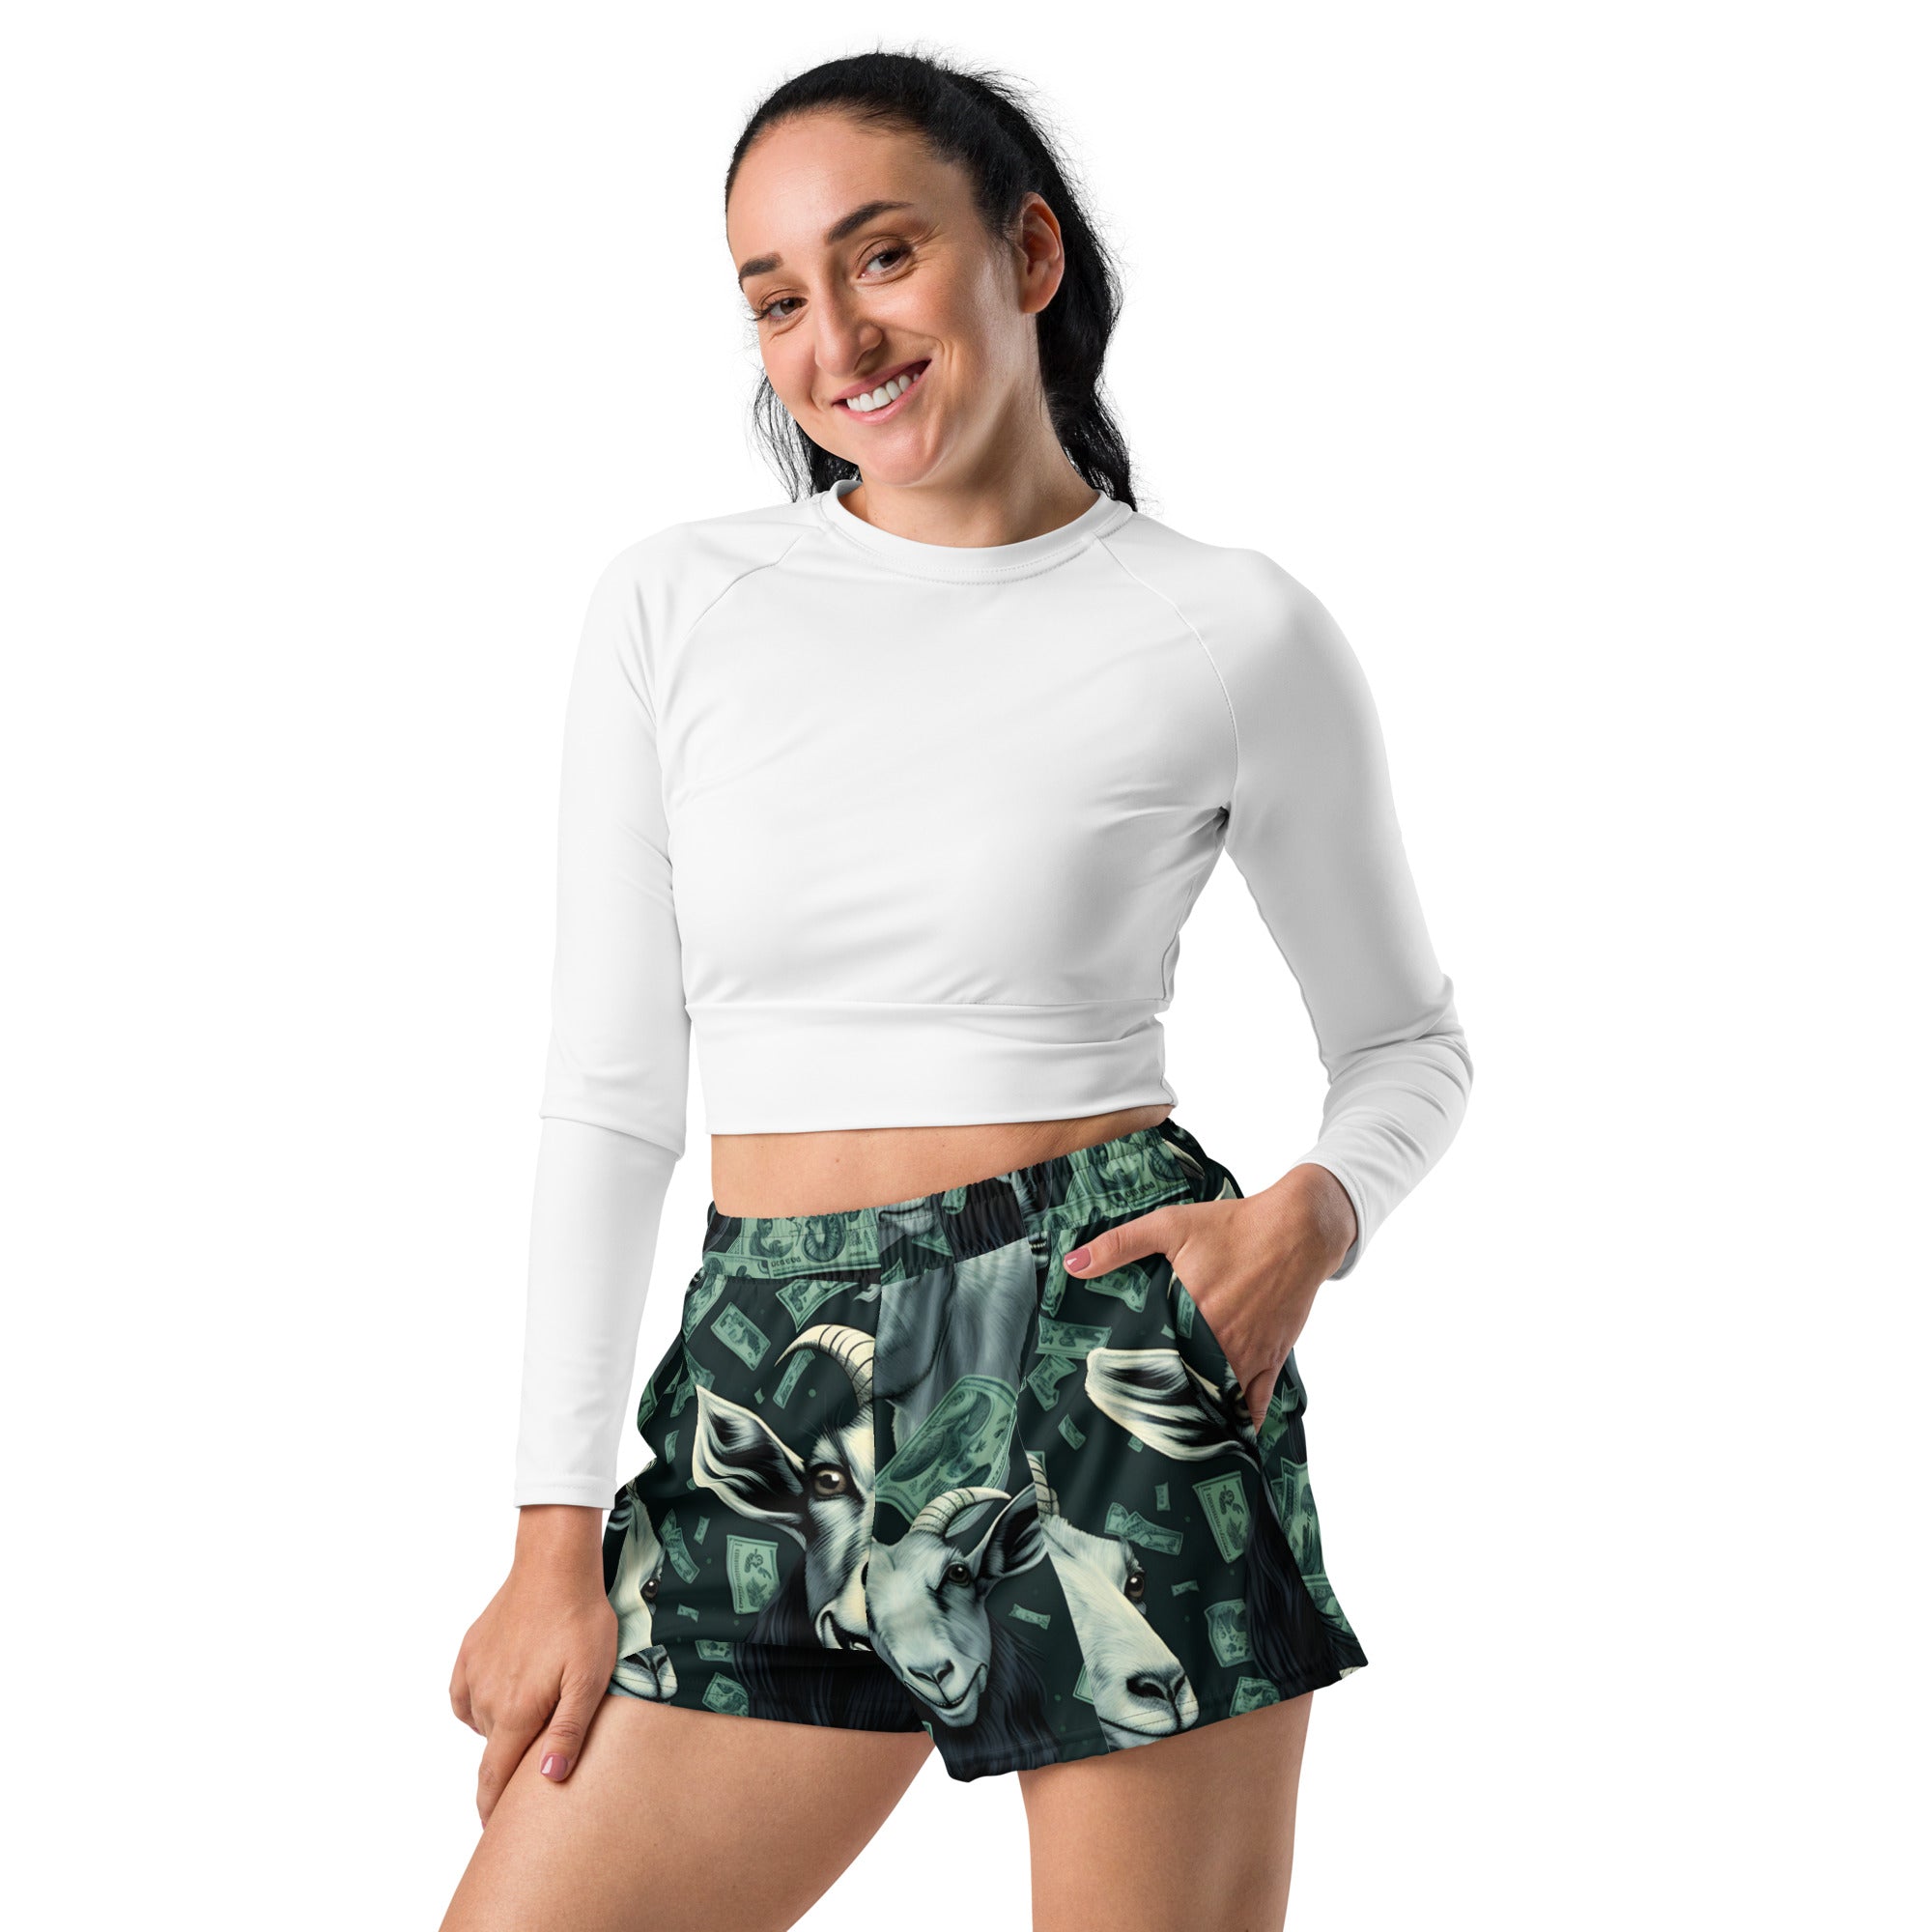 Money and GOATS Women’s Recycled Athletic Shorts